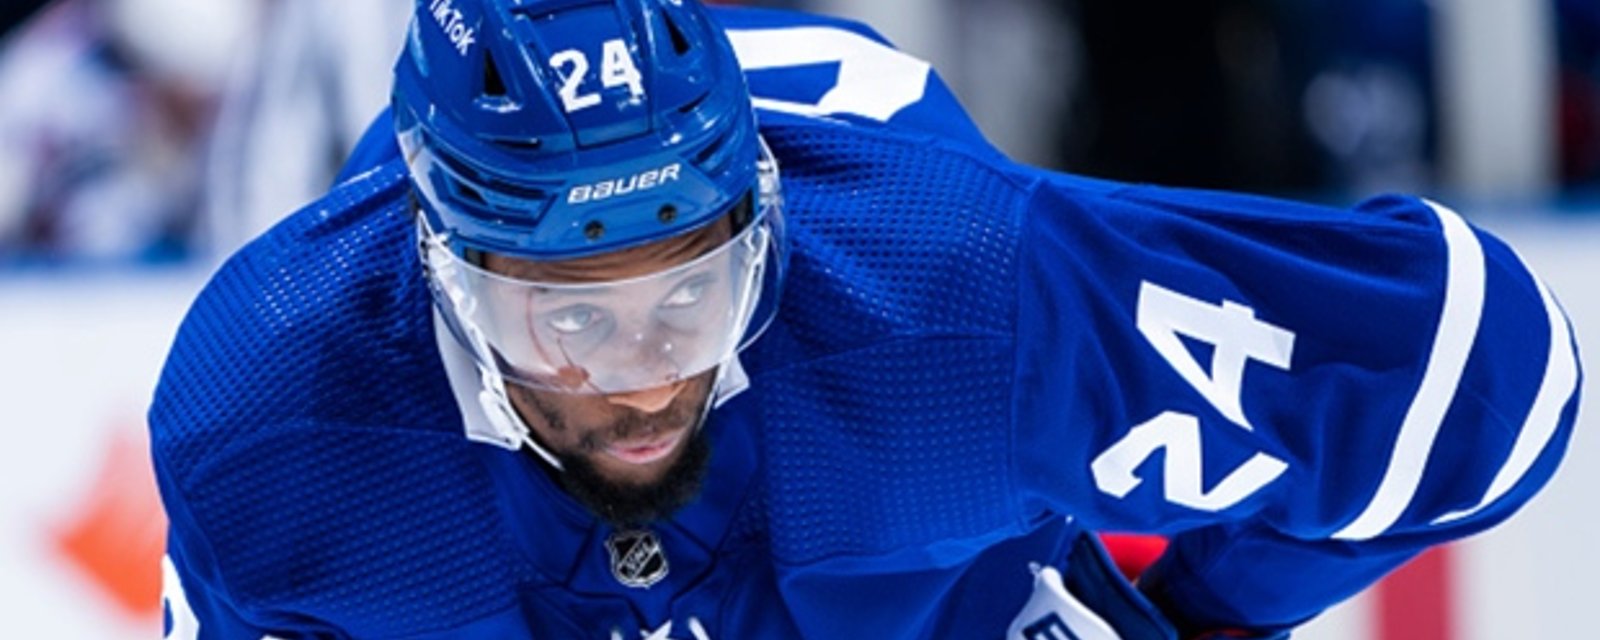 Wayne Simmonds finds out his fate and clarifies Toronto’s trade plans